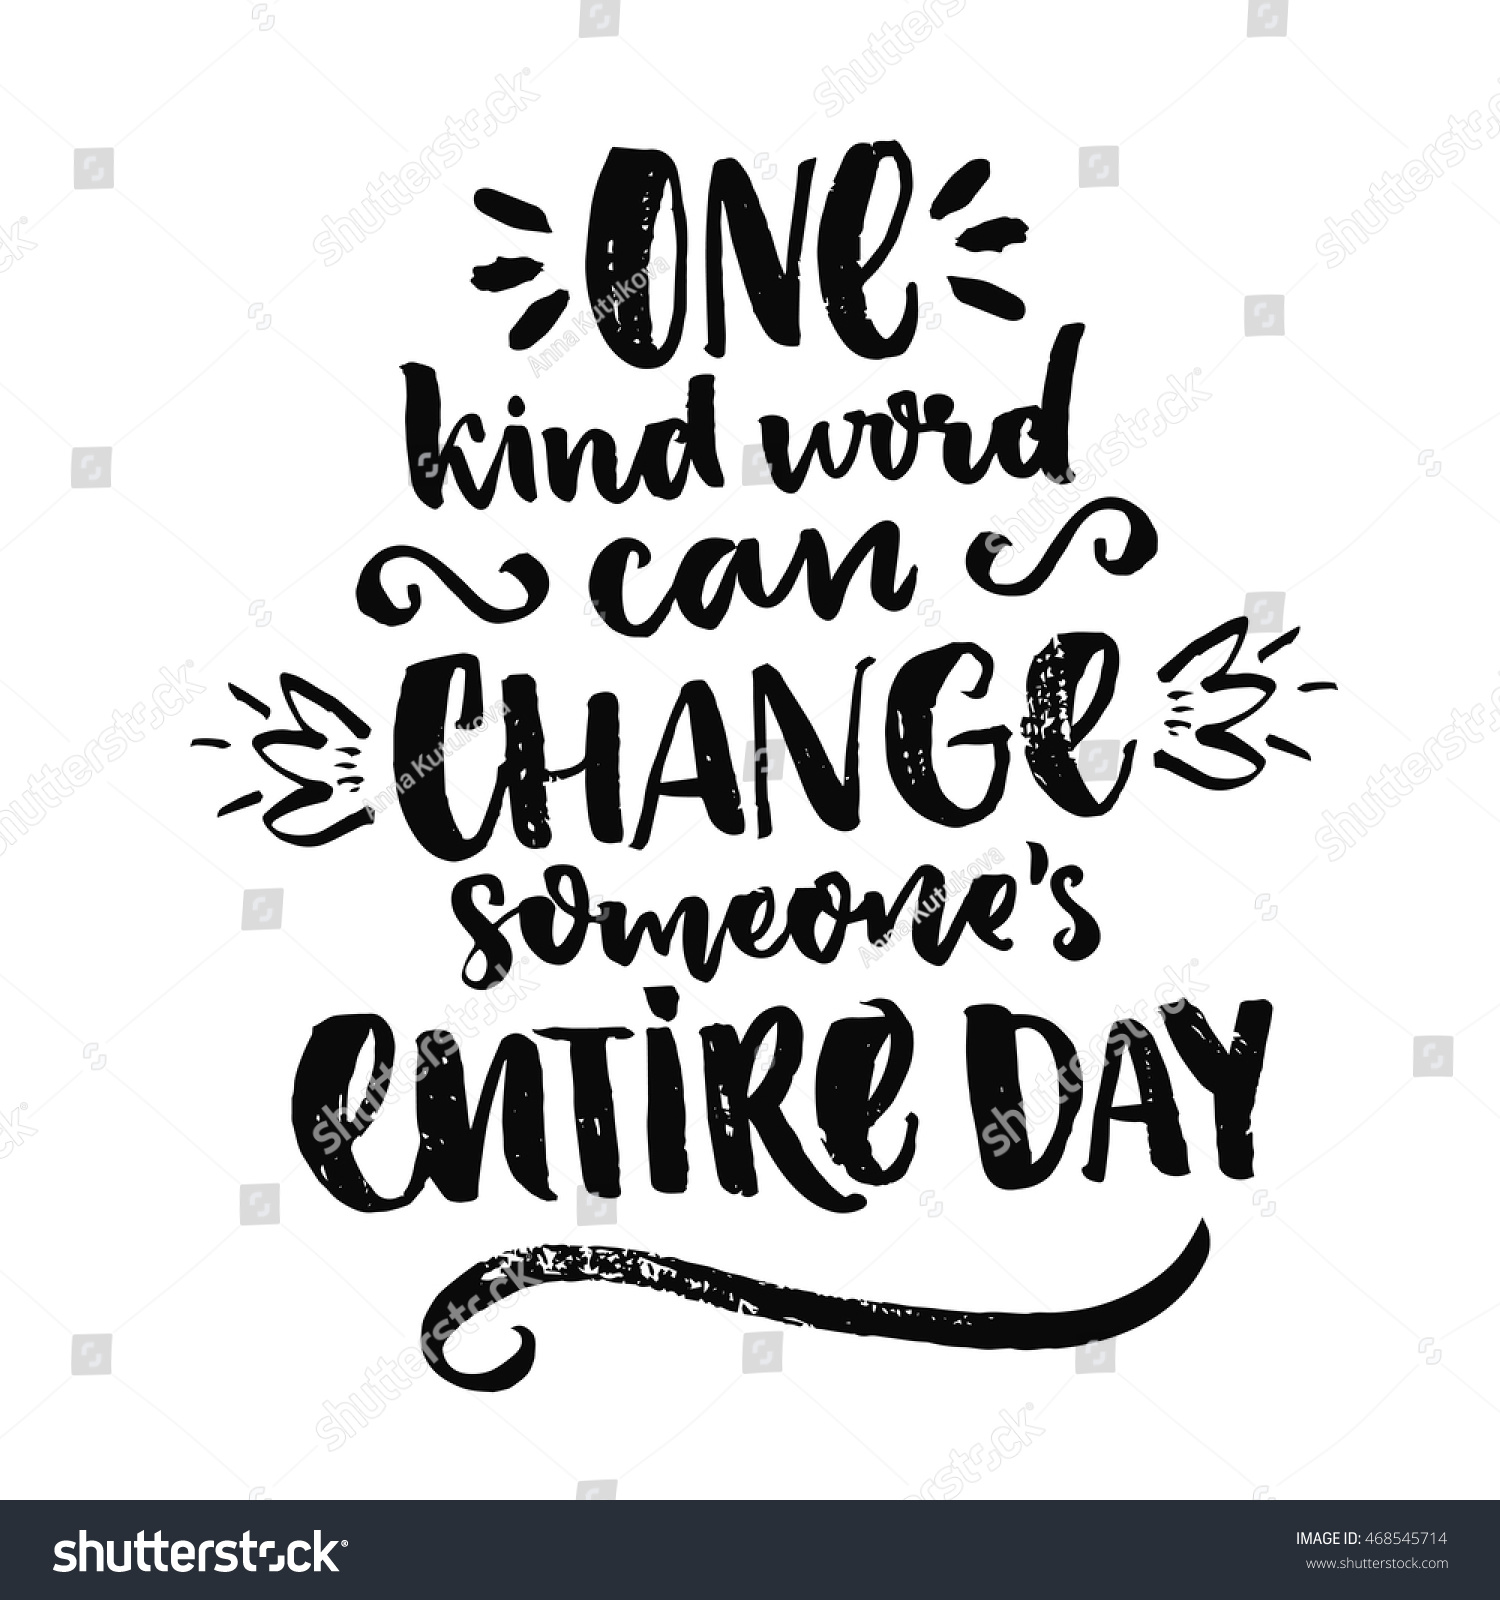 One kind word can change someone's entire day. Inspiration quote about love and kindness. Vector positive saying inscription handwritten with black ink on white background #468545714